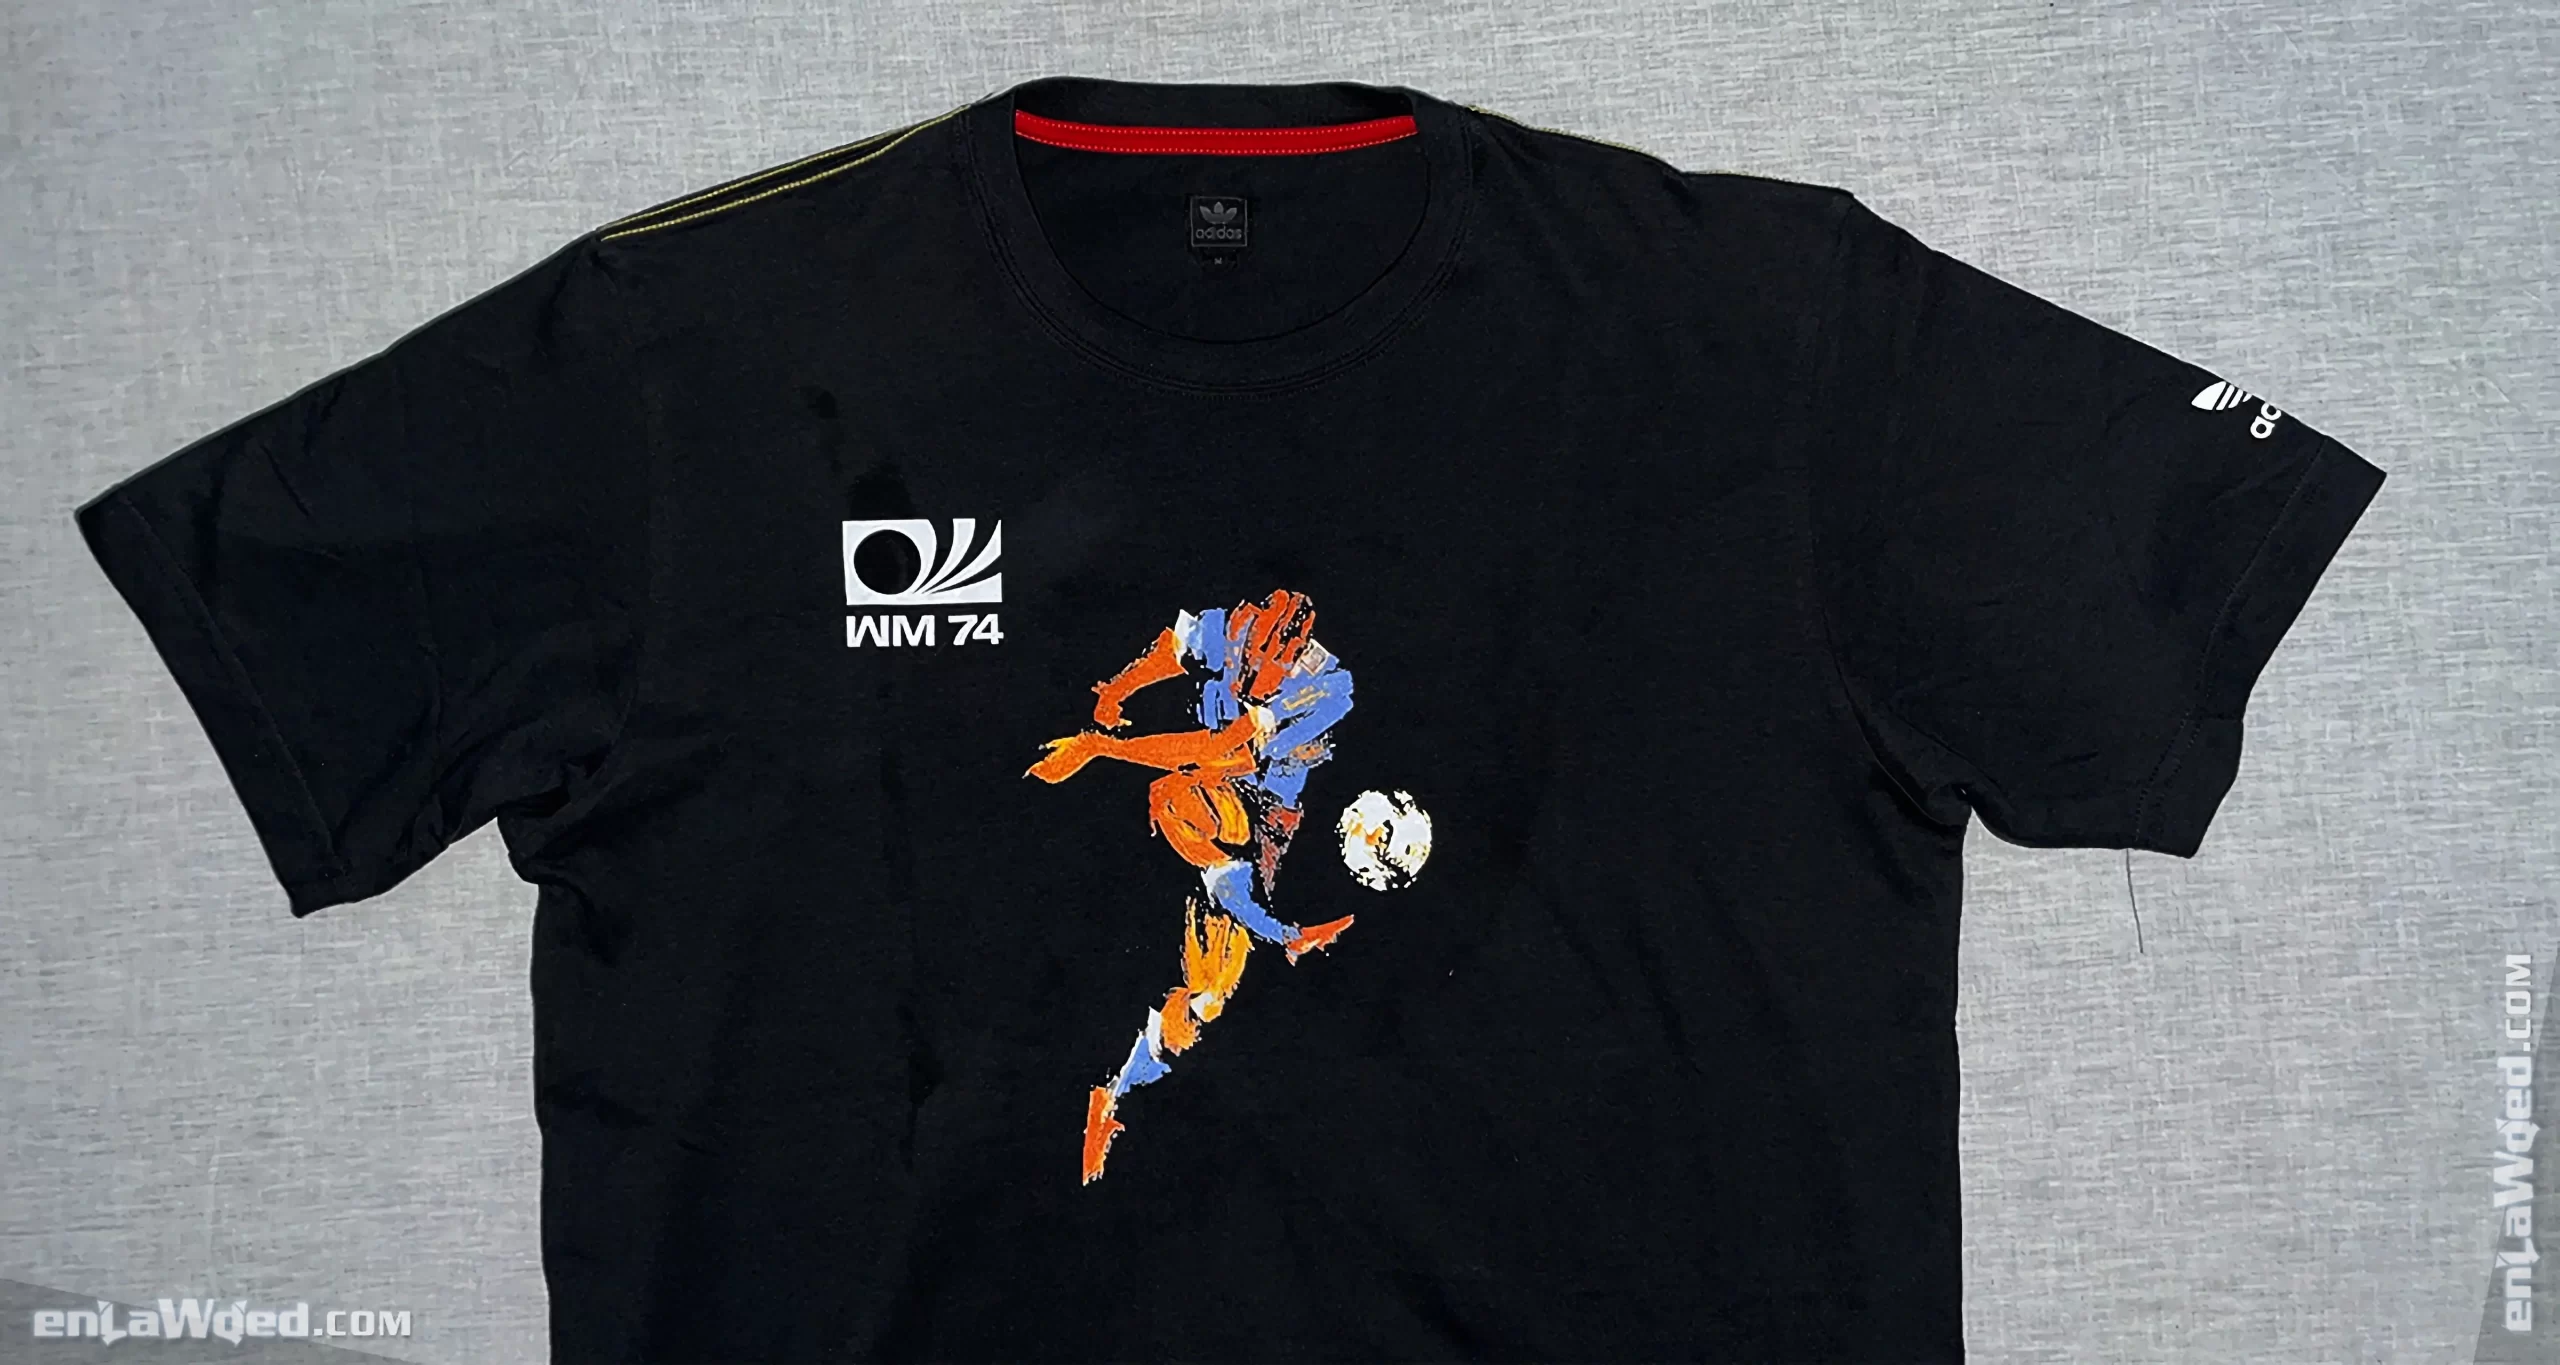 Men’s 2006 Germany ’74 FIFA World Cup T-Shirt by Adidas: Constructive (EnLawded.com file #lmc3ucn91st0x1f8guv)